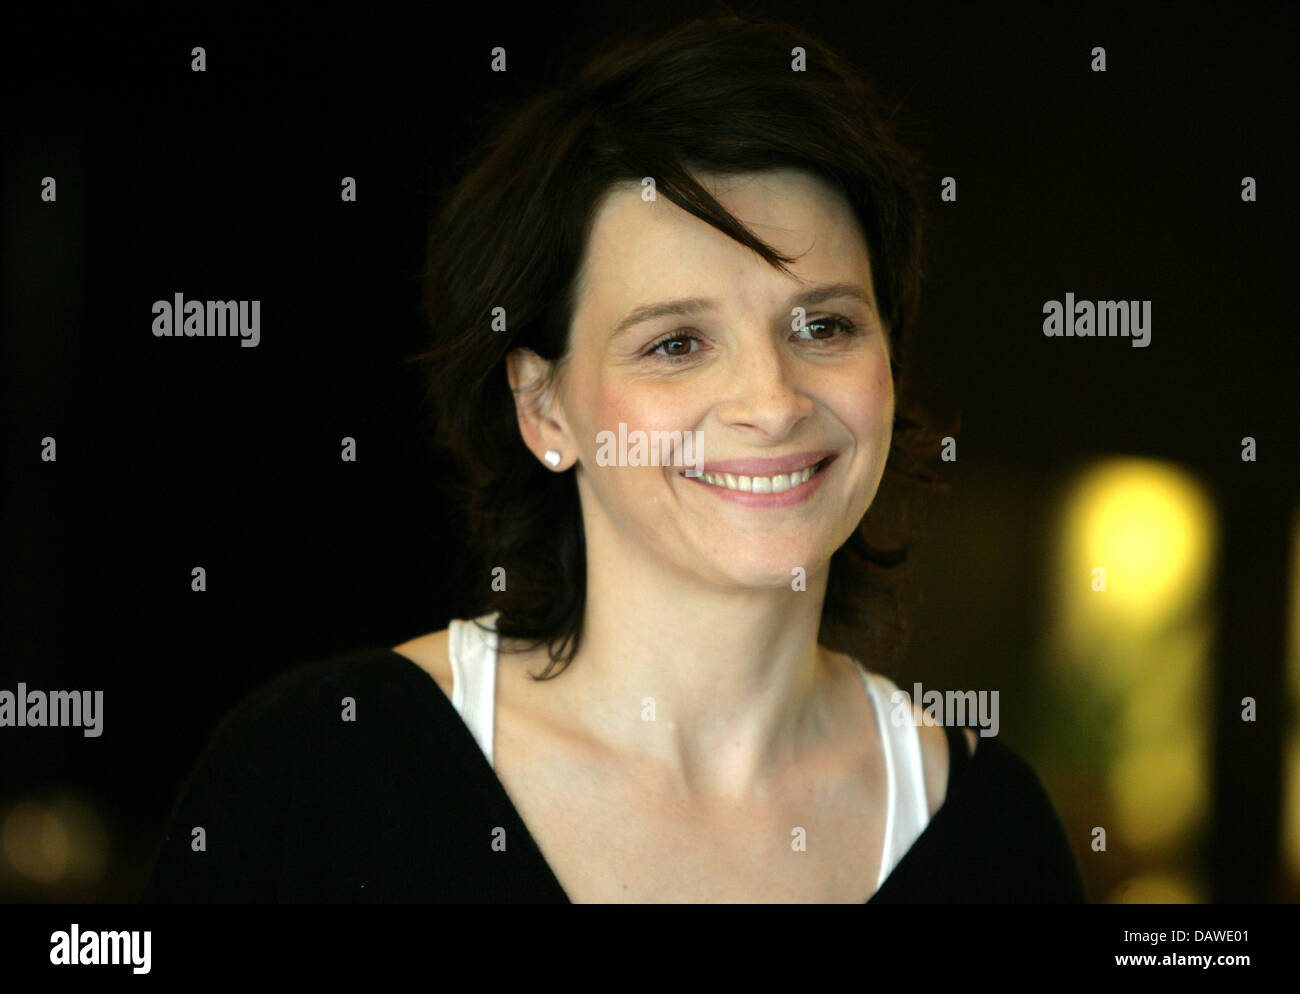 French actress Juliette Binoche is pictured in Cologne, Germany, Wednesday 04 April 2007. Binoche is currently shooting the film 'Disengagement' in which she stars as a mother who sees her daughter again in Israel 20 years after she gave the child away right after giving birth. Photo: Rolf Vennenbernd Stock Photo